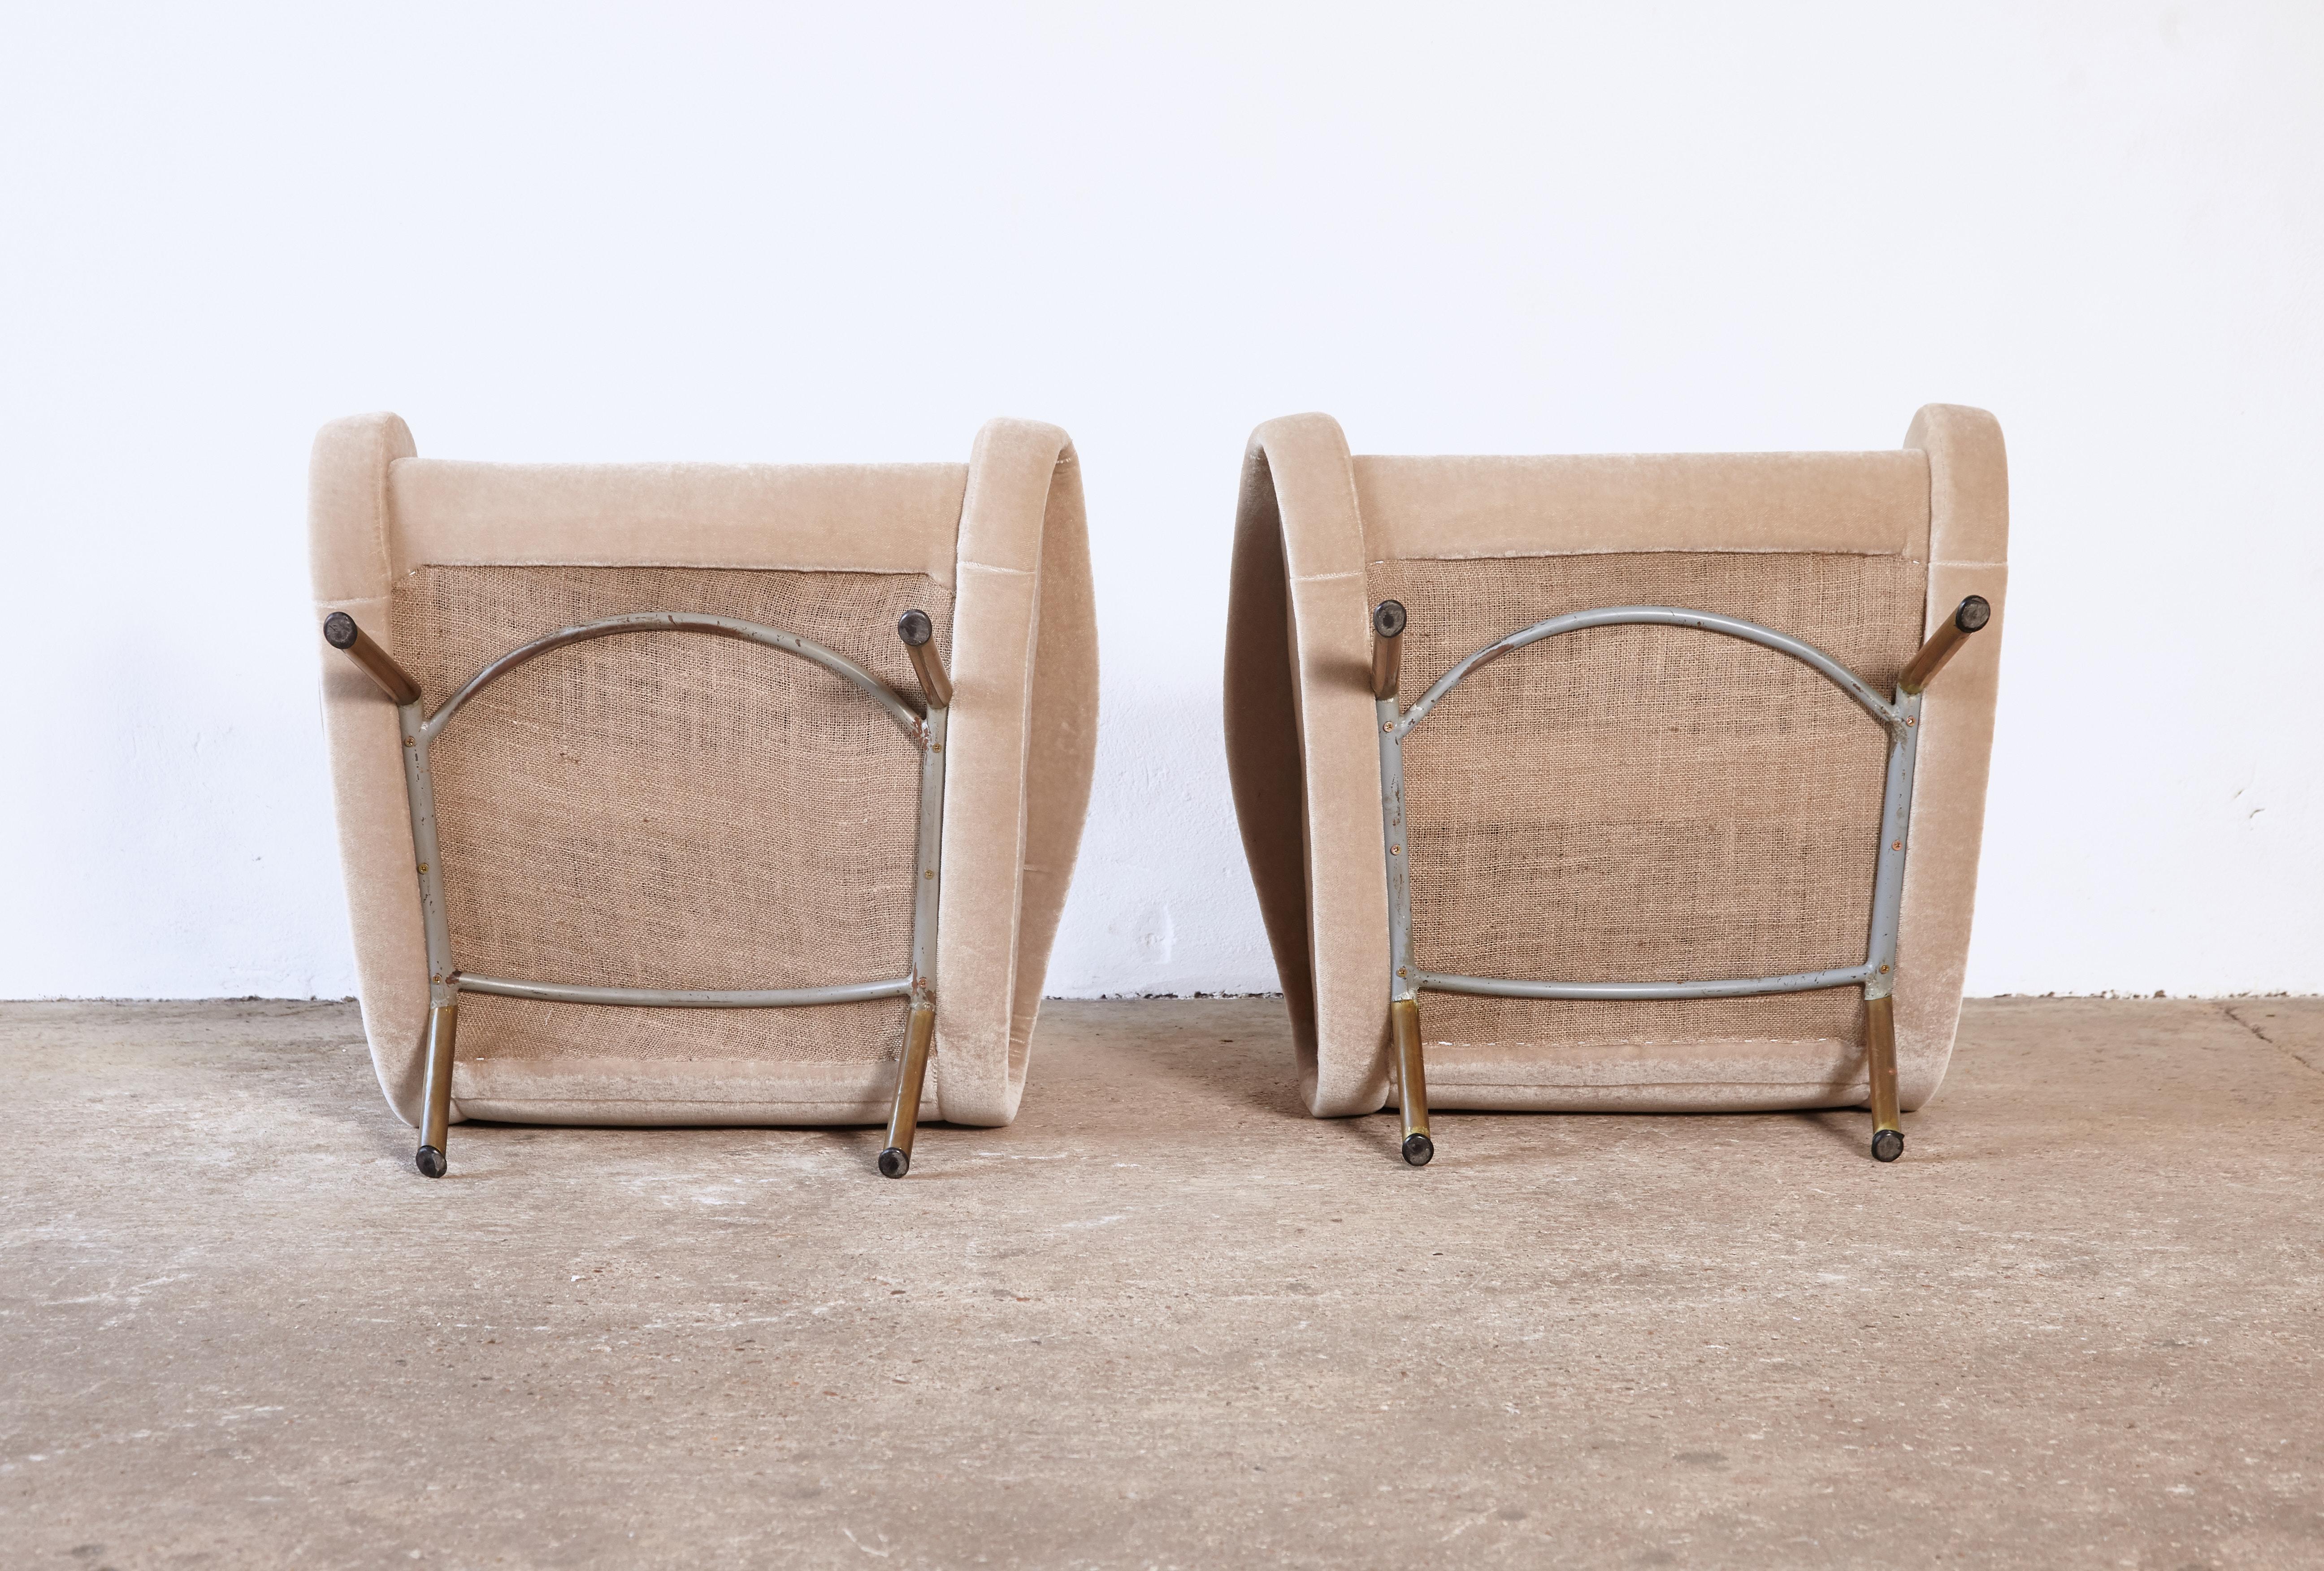 Authentic Marco Zanuso Lady Chairs, 1950s, Newly Reupholstered in Mohair 1